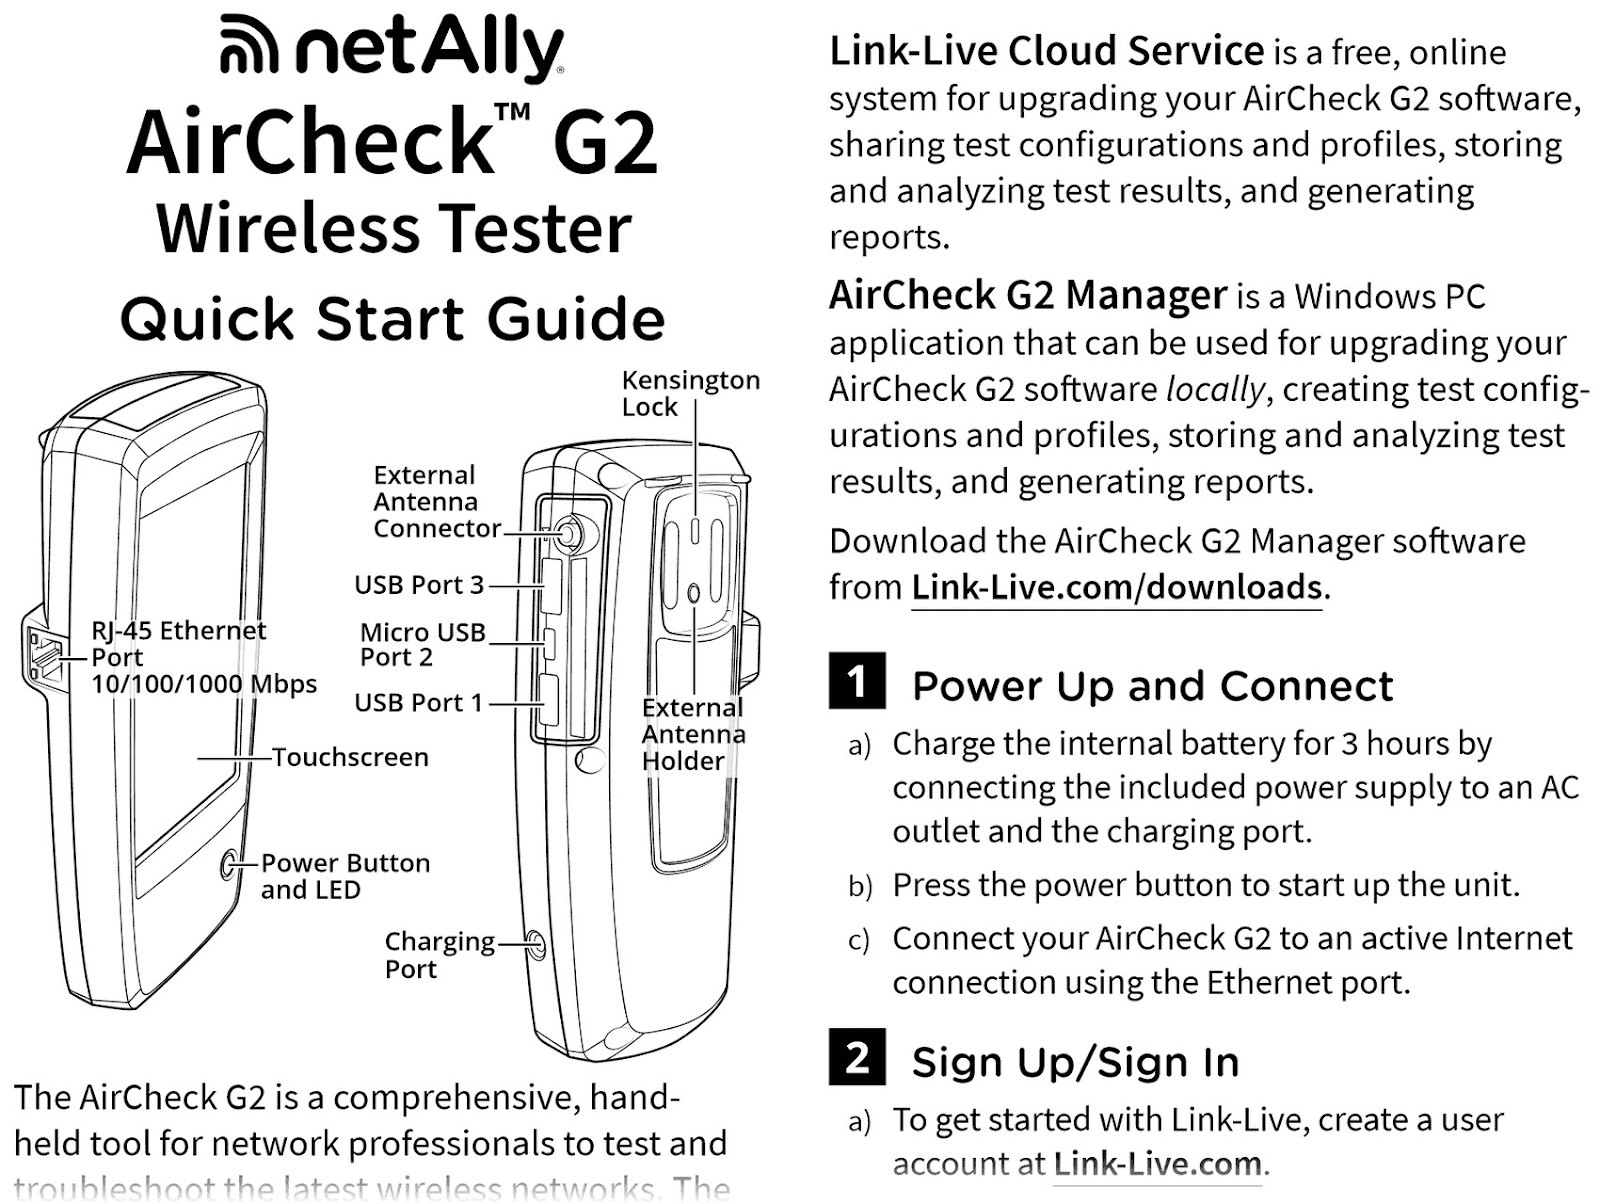 NetAlly’s "AirCheck G2 Wireless Tester Quick Start Guide" page